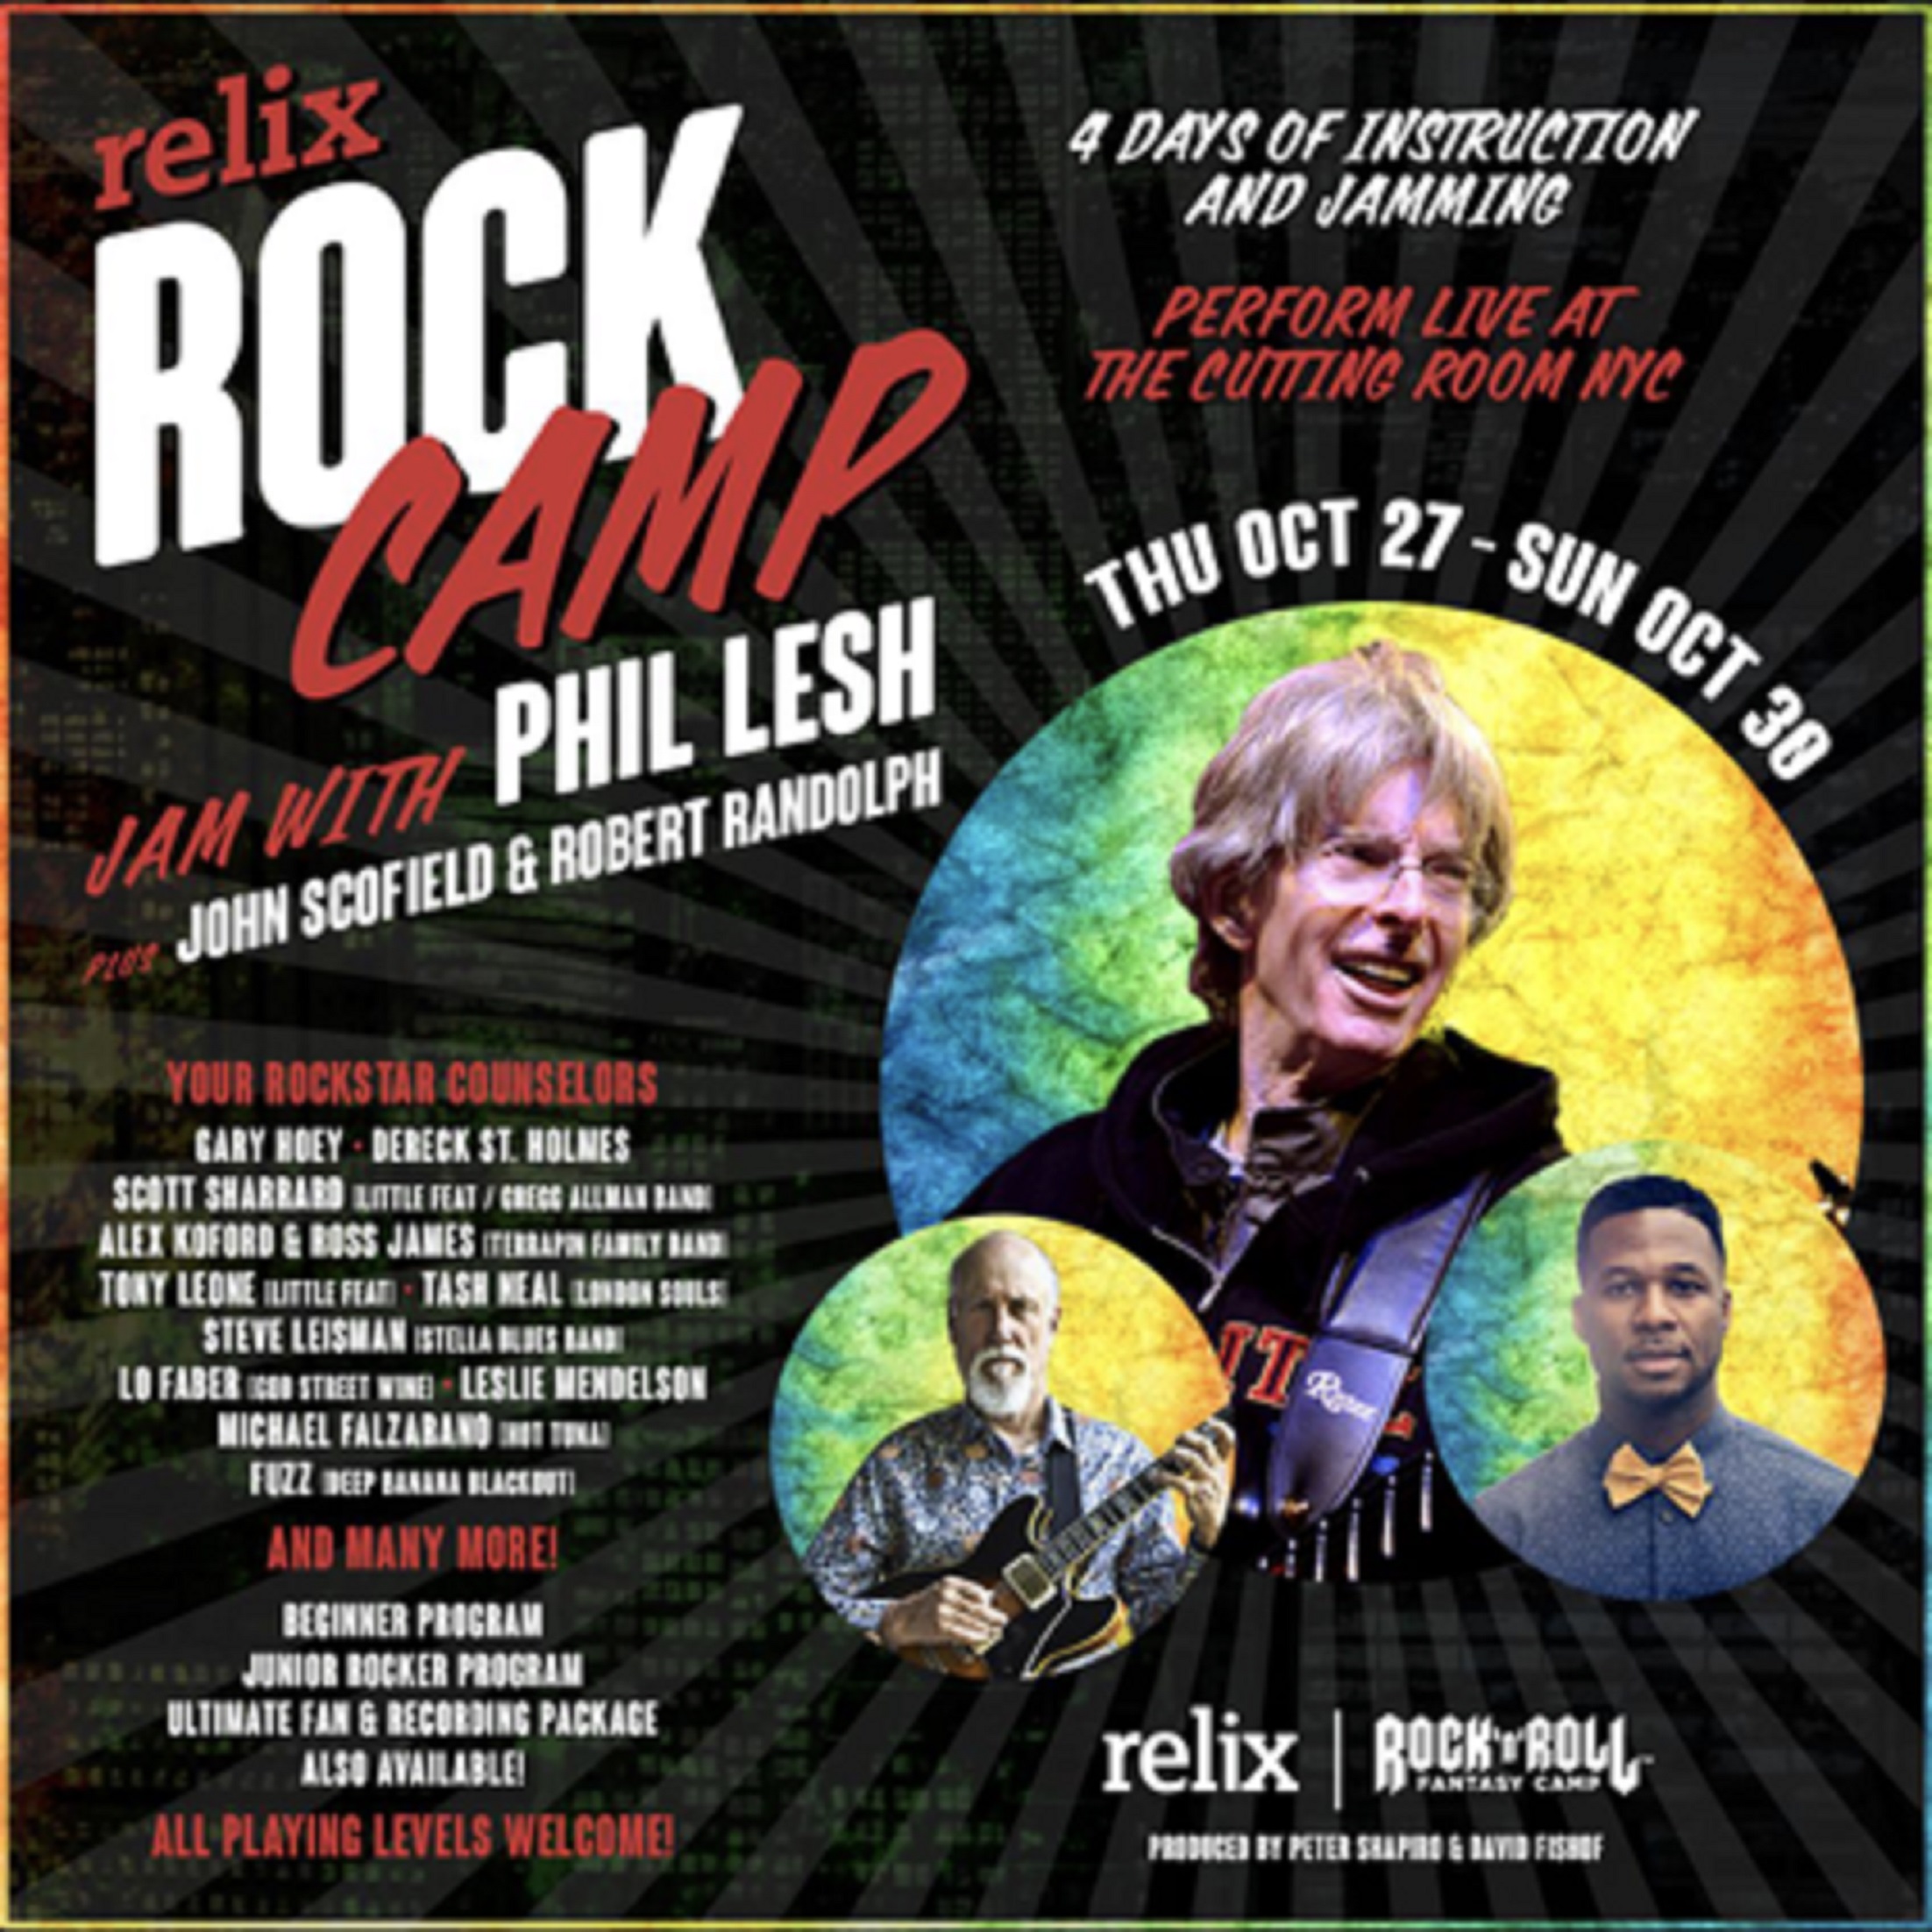 Relix & Rock 'n' Roll Fantasy Camp are Proud to Present the Inaugural “RELIX ROCK CAMP” Featuring Phil Lesh